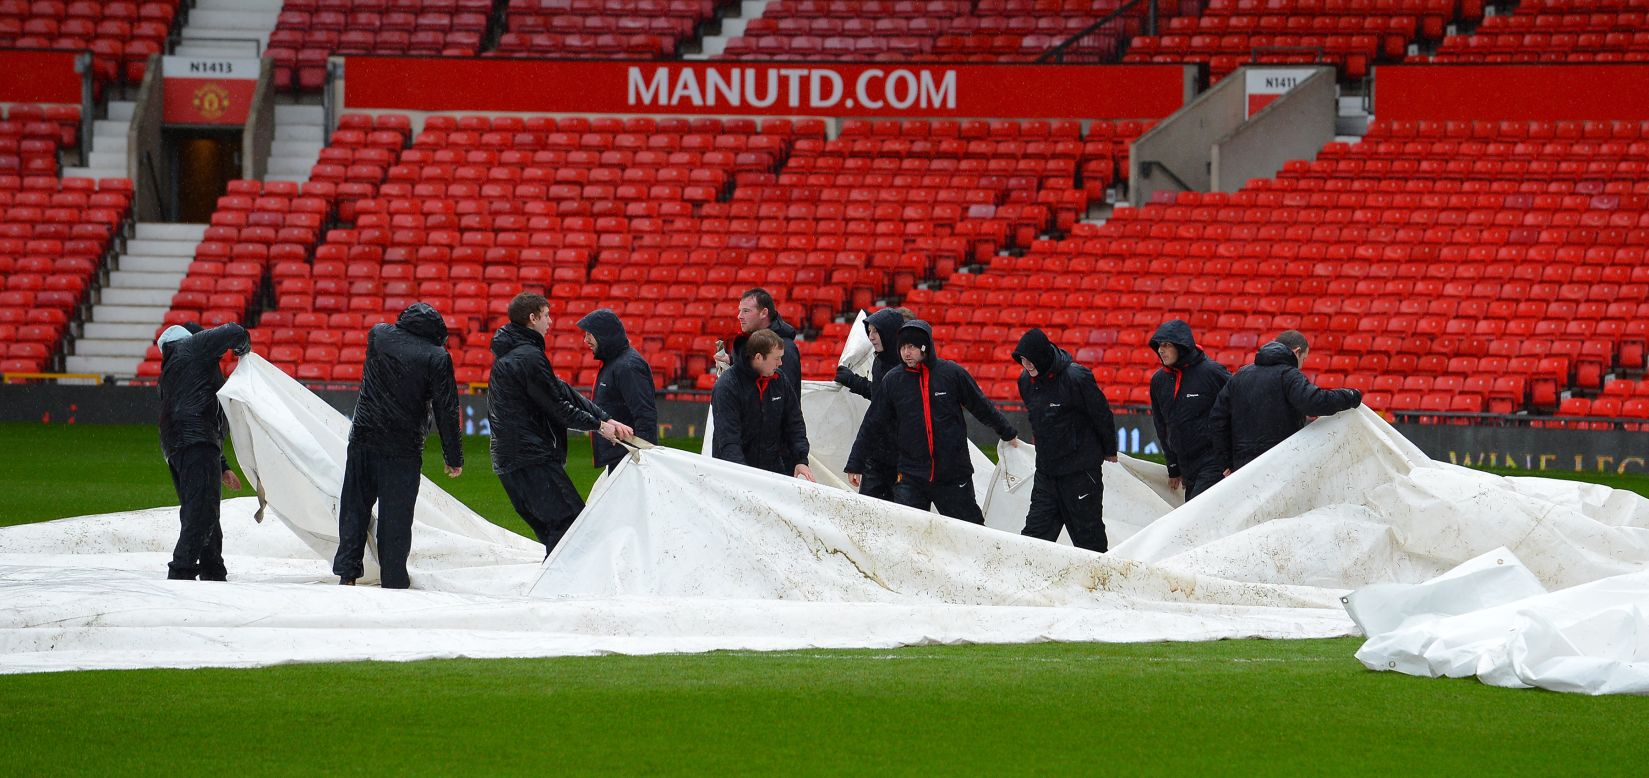 The match was cleared to go ahead after a late pitch inspection following days of rain in the UK. Groundstaff remove waterproof covers which protected the playing surface.